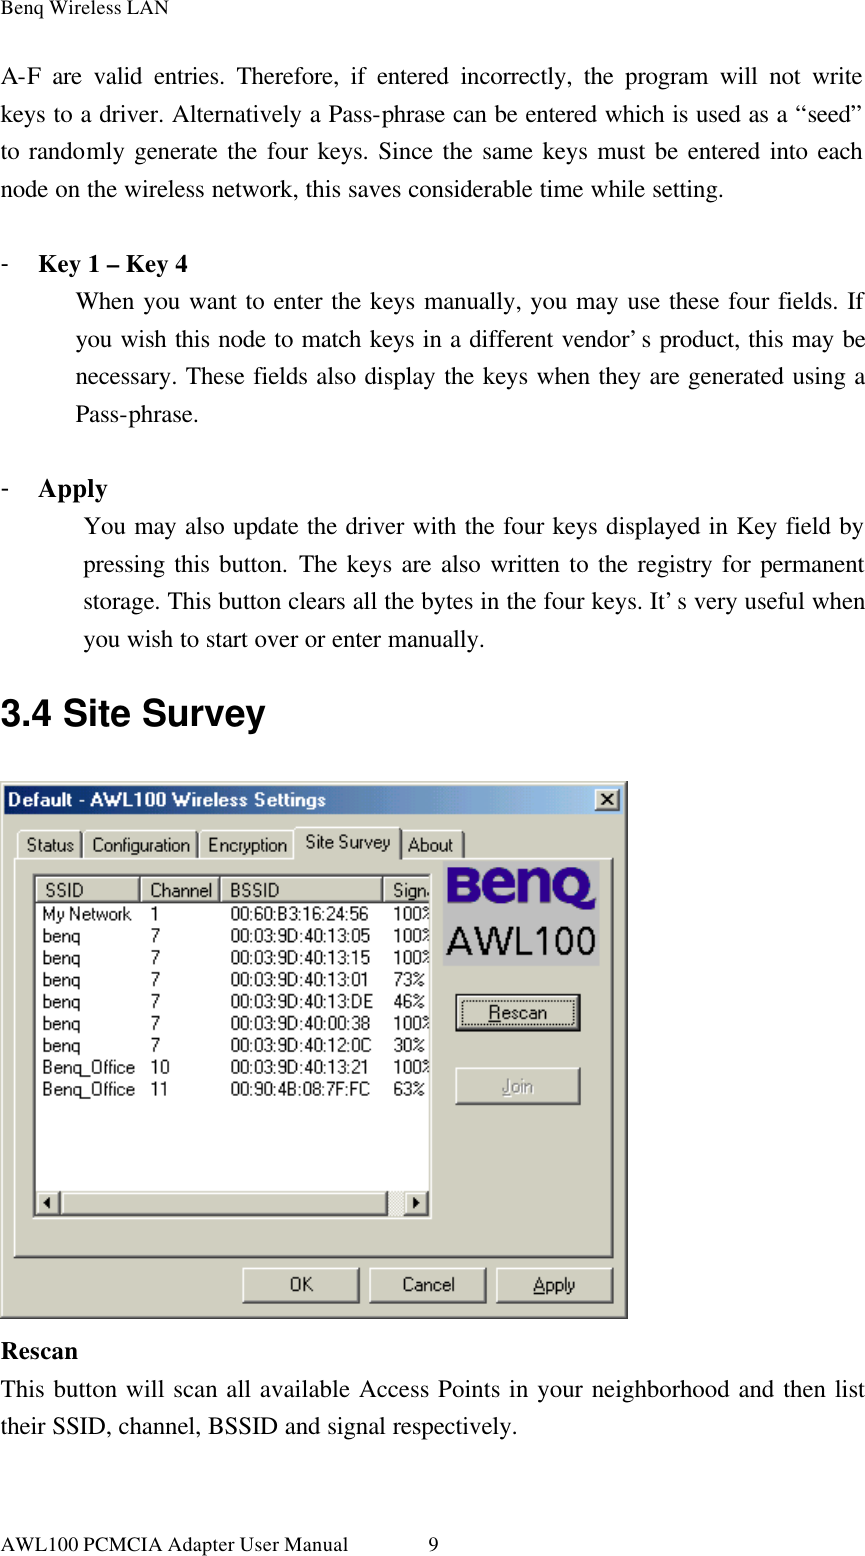 Benq Wireless LAN AWL100 PCMCIA Adapter User Manual 9A-F are valid entries. Therefore, if entered incorrectly, the program will not write keys to a driver. Alternatively a Pass-phrase can be entered which is used as a “seed” to randomly generate the four keys. Since the same keys must be entered into each node on the wireless network, this saves considerable time while setting.  - Key 1 – Key 4 When you want to enter the keys manually, you may use these four fields. If you wish this node to match keys in a different vendor’s product, this may be necessary. These fields also display the keys when they are generated using a Pass-phrase.  - Apply You may also update the driver with the four keys displayed in Key field by pressing this button. The keys are also written to the registry for permanent storage. This button clears all the bytes in the four keys. It’s very useful when you wish to start over or enter manually. 3.4 Site Survey  Rescan This button will scan all available Access Points in your neighborhood and then list their SSID, channel, BSSID and signal respectively.  